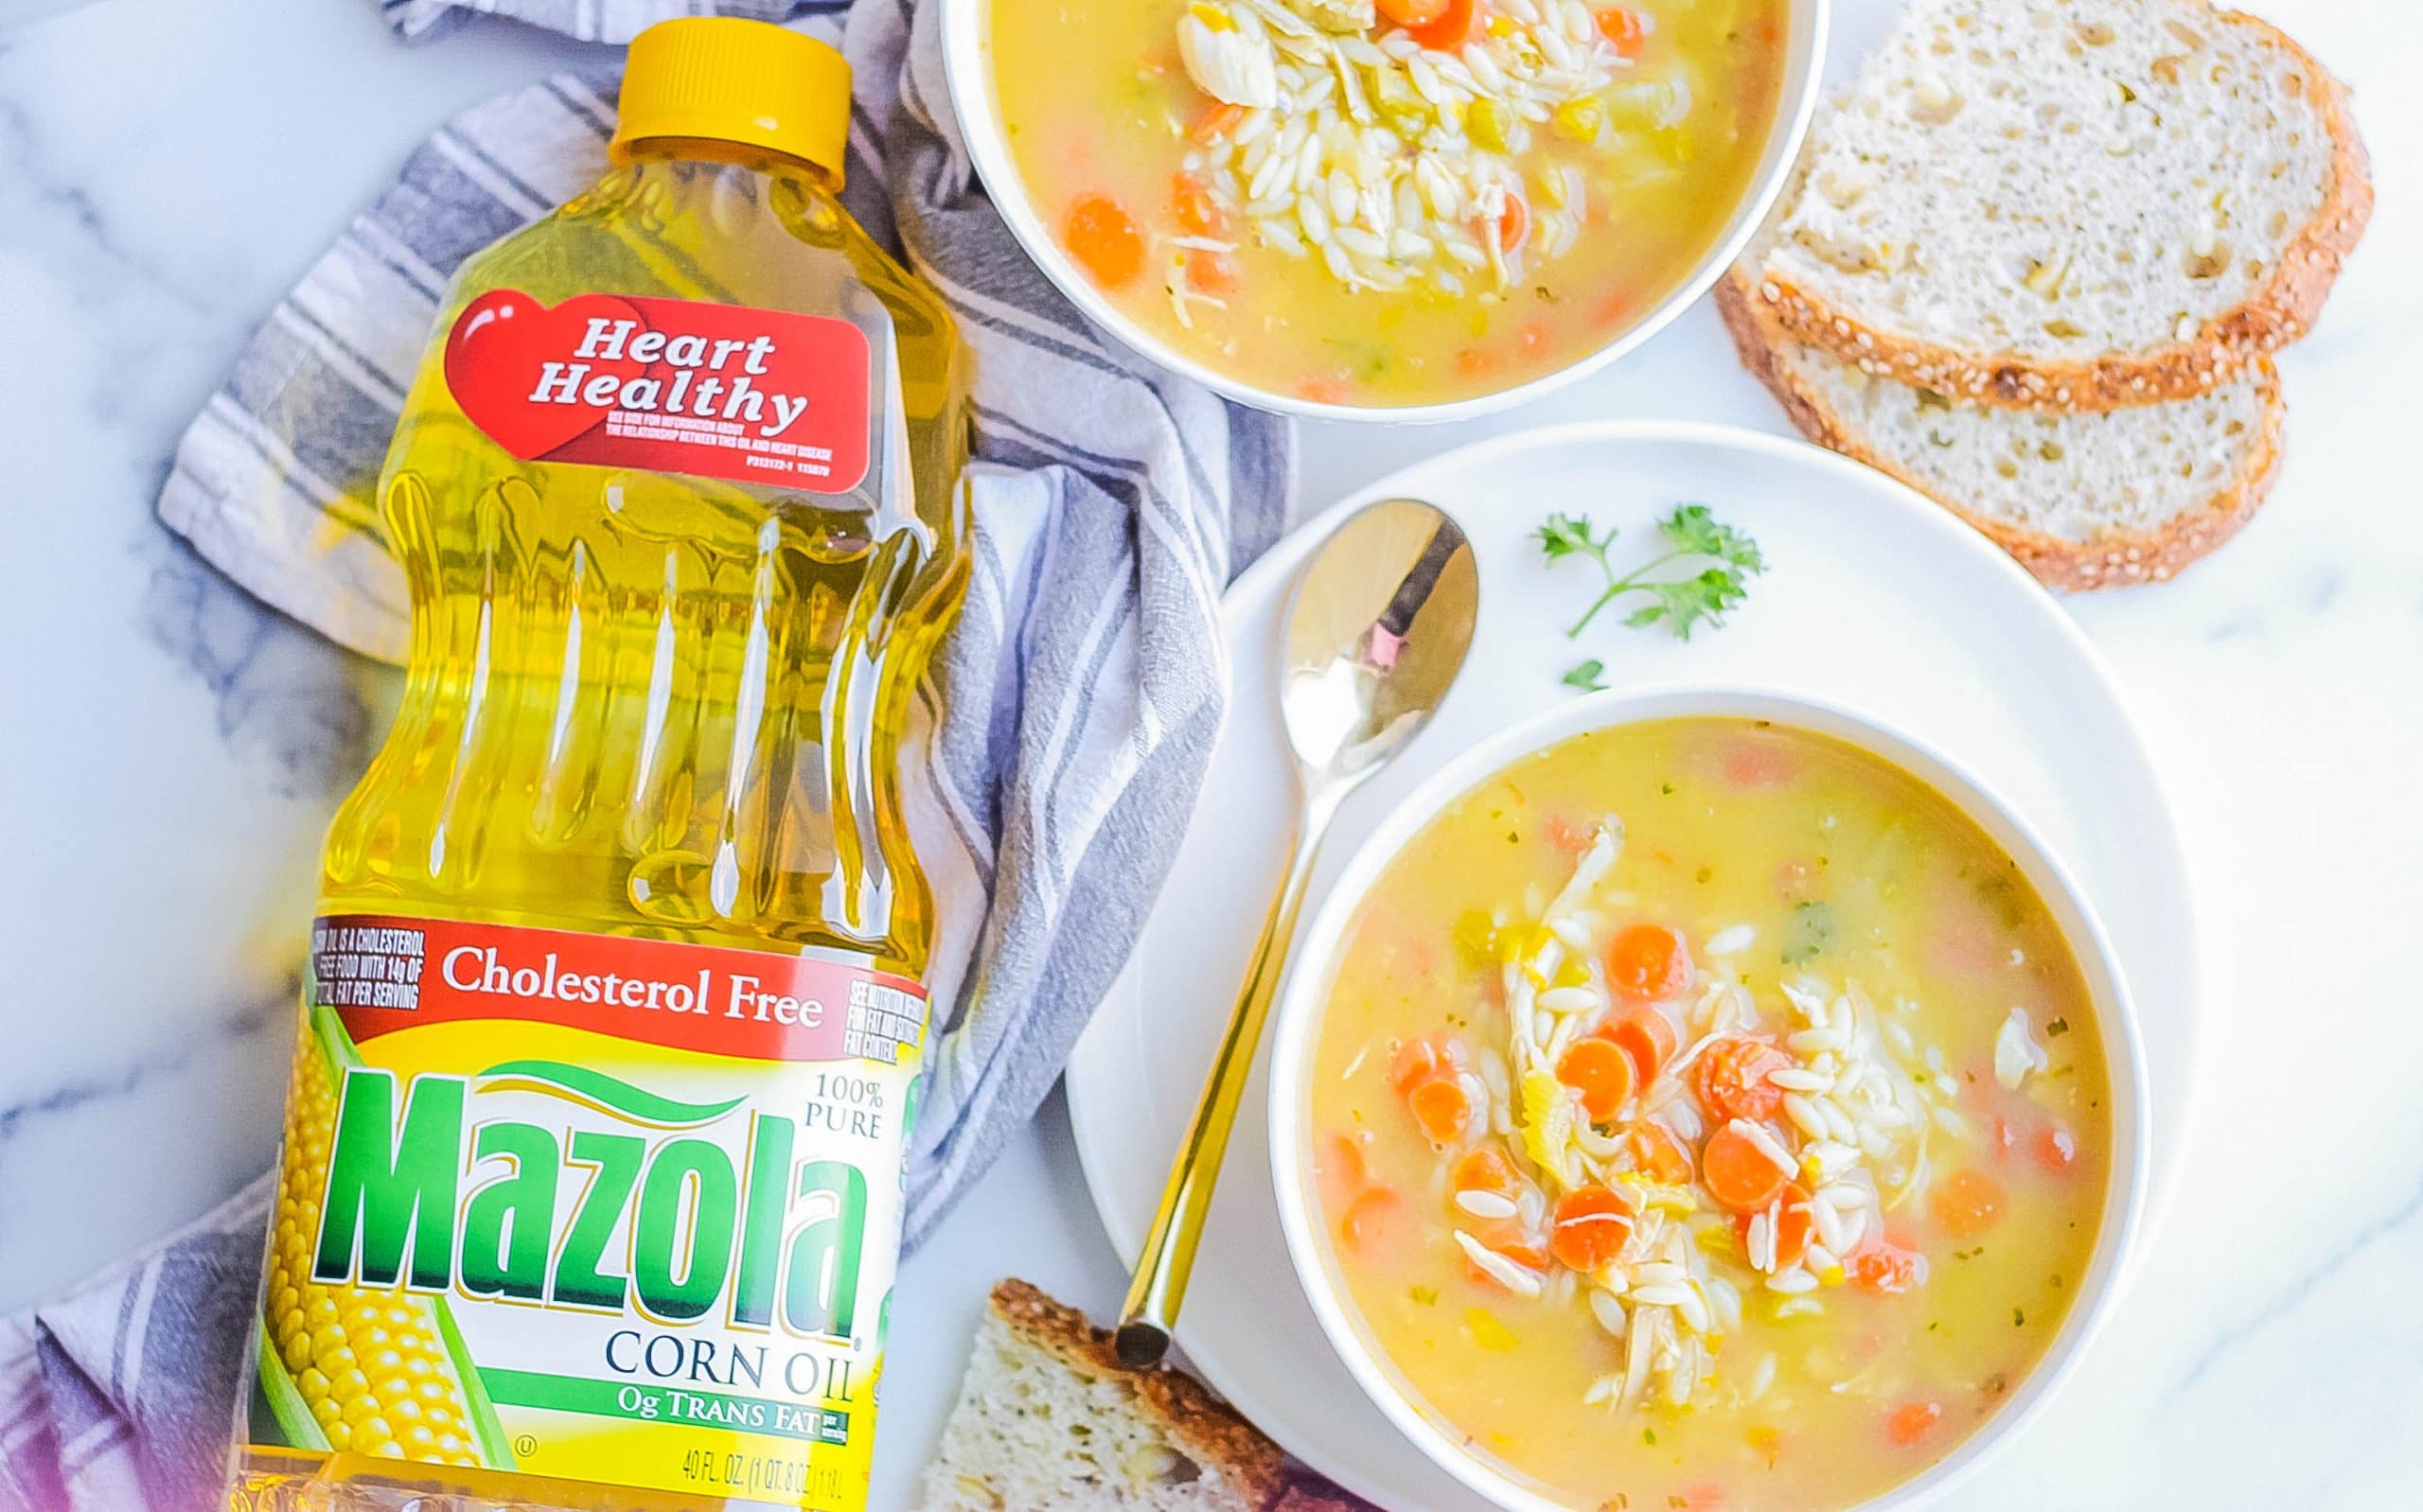 Lemon Chicken Orzo Soup with Mazola oil